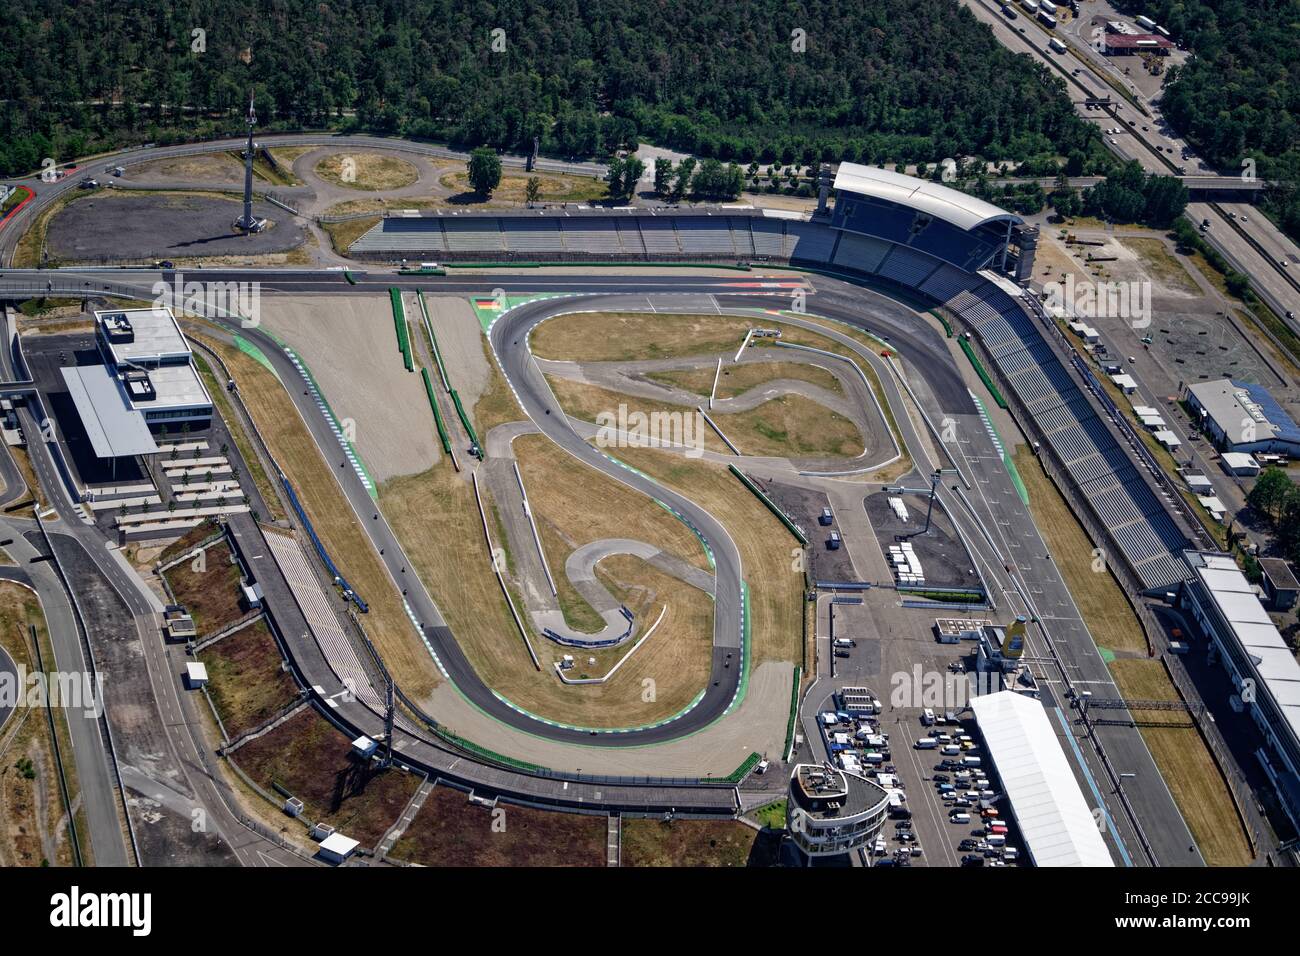 Aerial view at the Hockenheim-Ring a famous race track where the German Grand Prix takes place biennially. The Motodrom fits to 120,000 visitors. Stock Photo